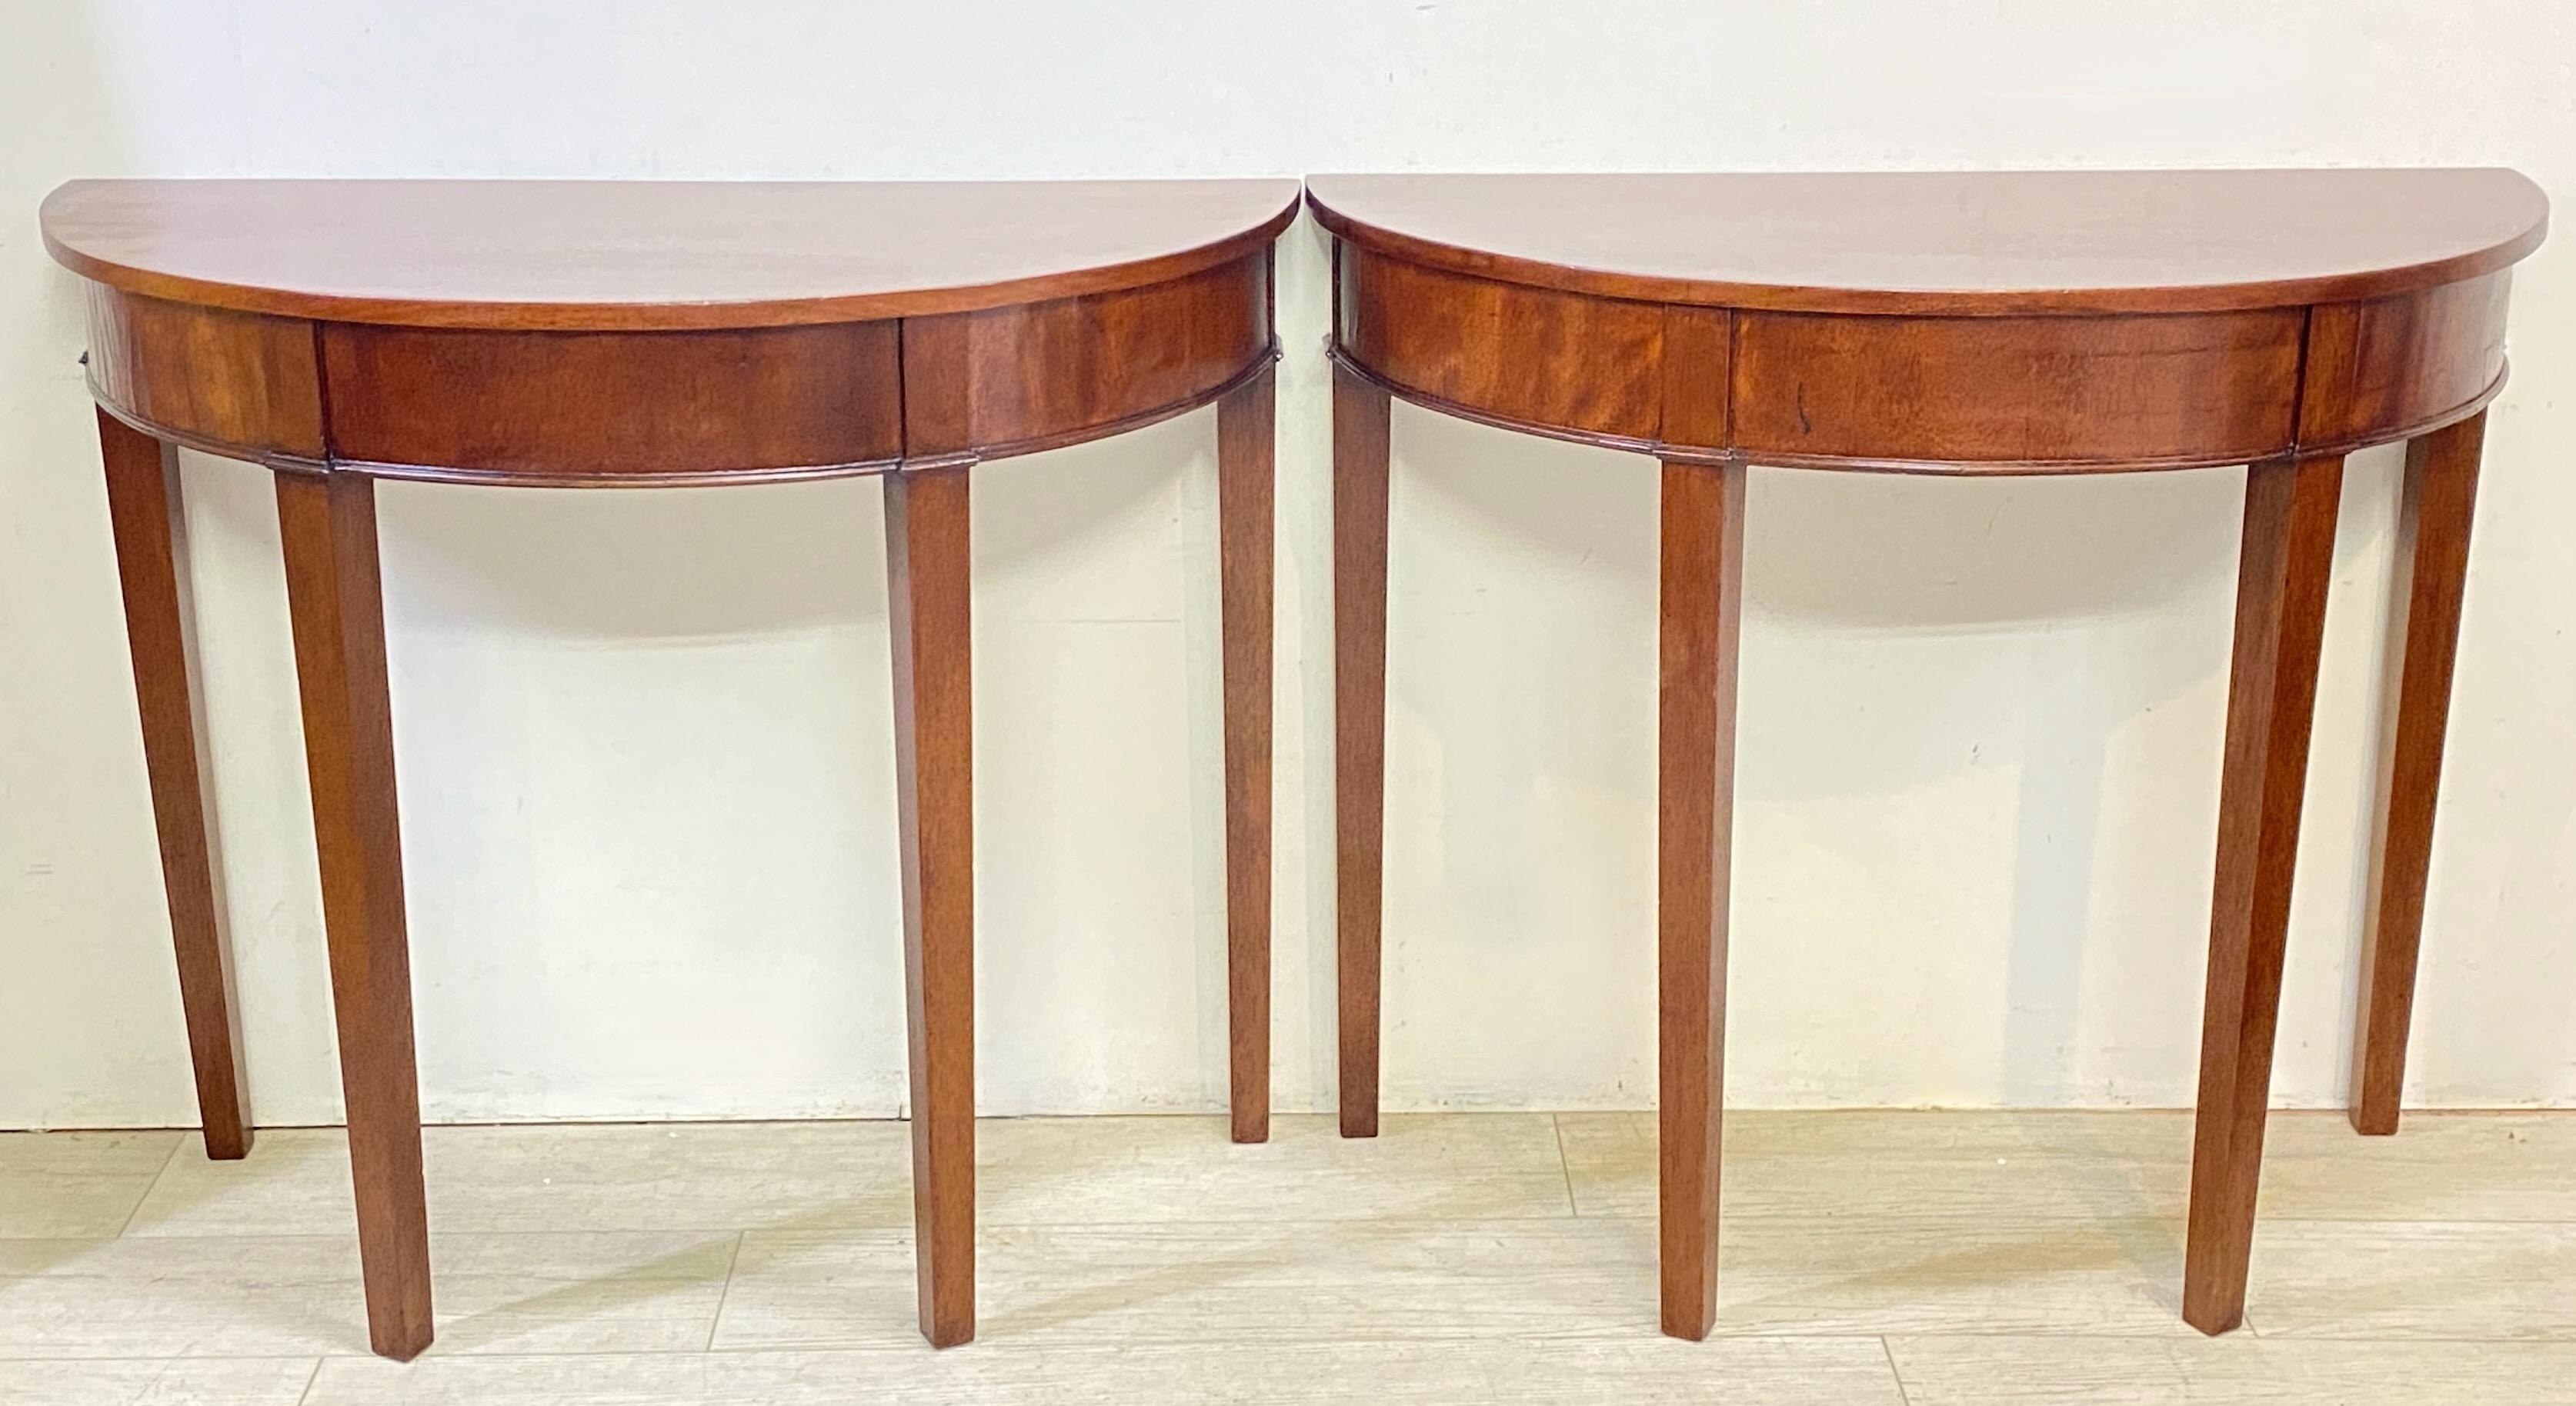 A classic pair of Georgian period mahogany Demi Lune console tables that fit together to make a circular center table.
Originally had center leaf (now missing).
England, early 19th century.
In excellent antique condition.
  